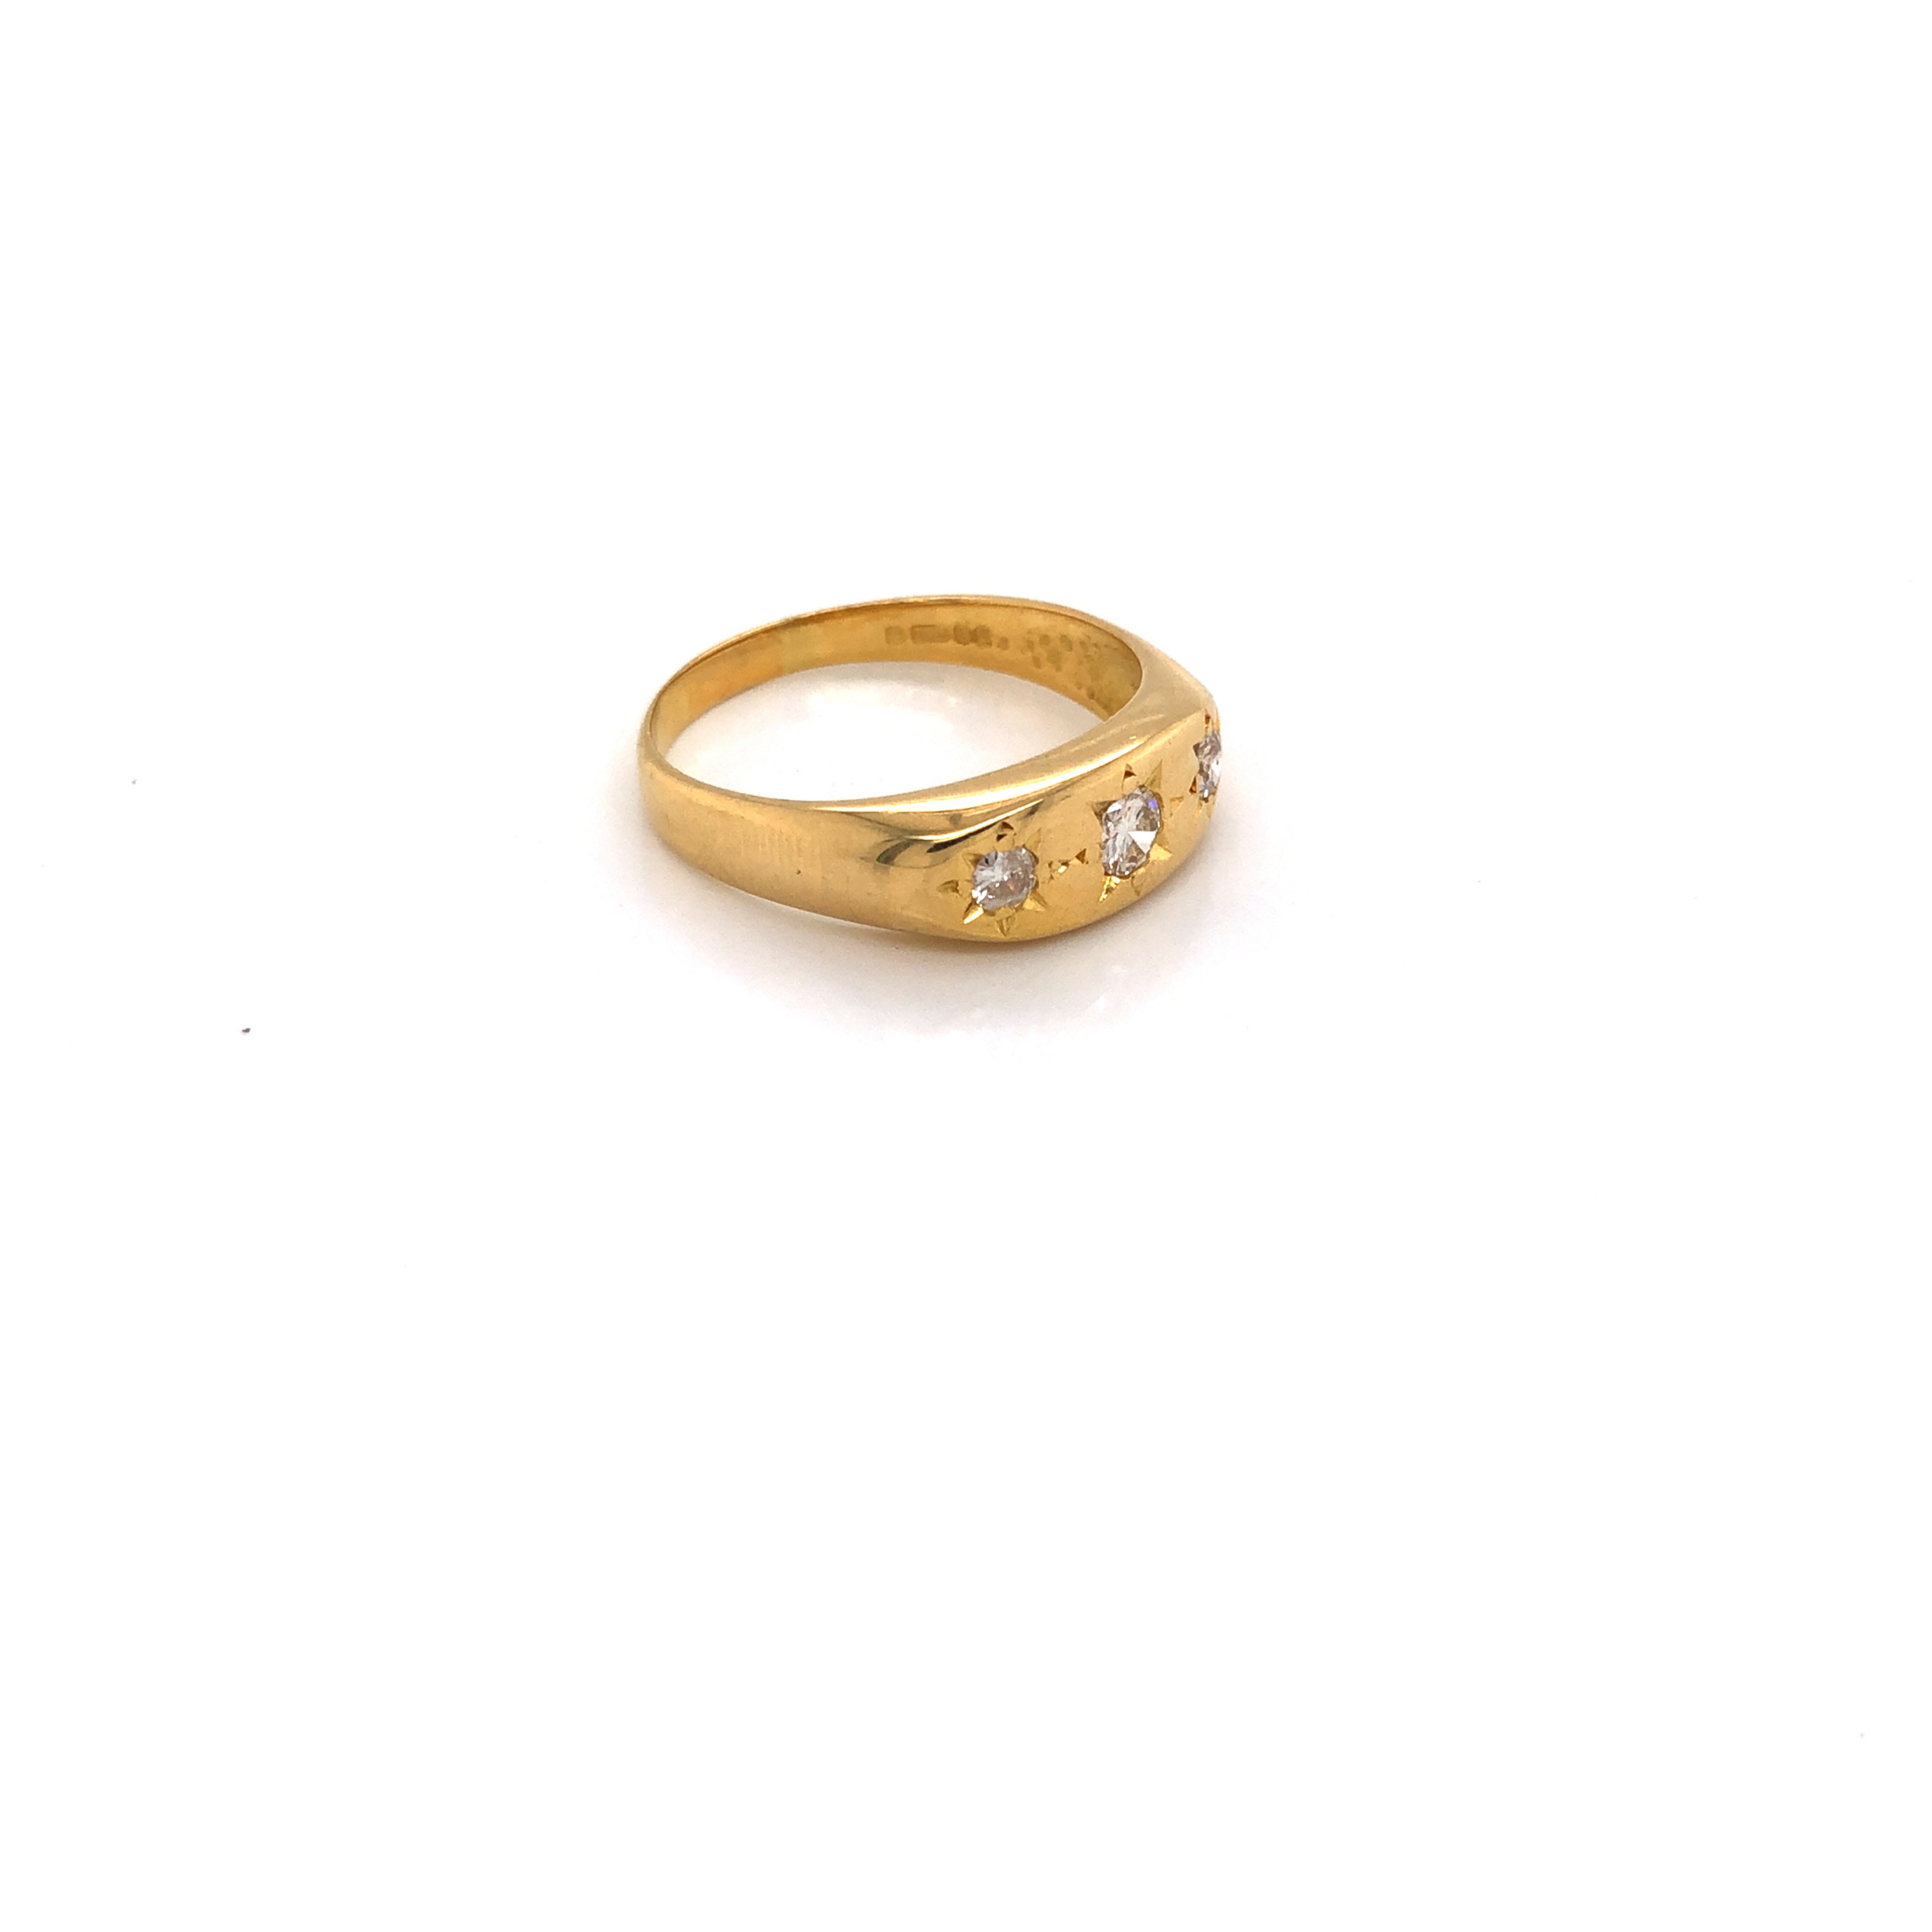 AN 18ct YELLOW GOLD HALLMARKED THREE STONE DIAMOND GYPSY RING. DATED 1982, LONDON. APPROX - Image 2 of 2